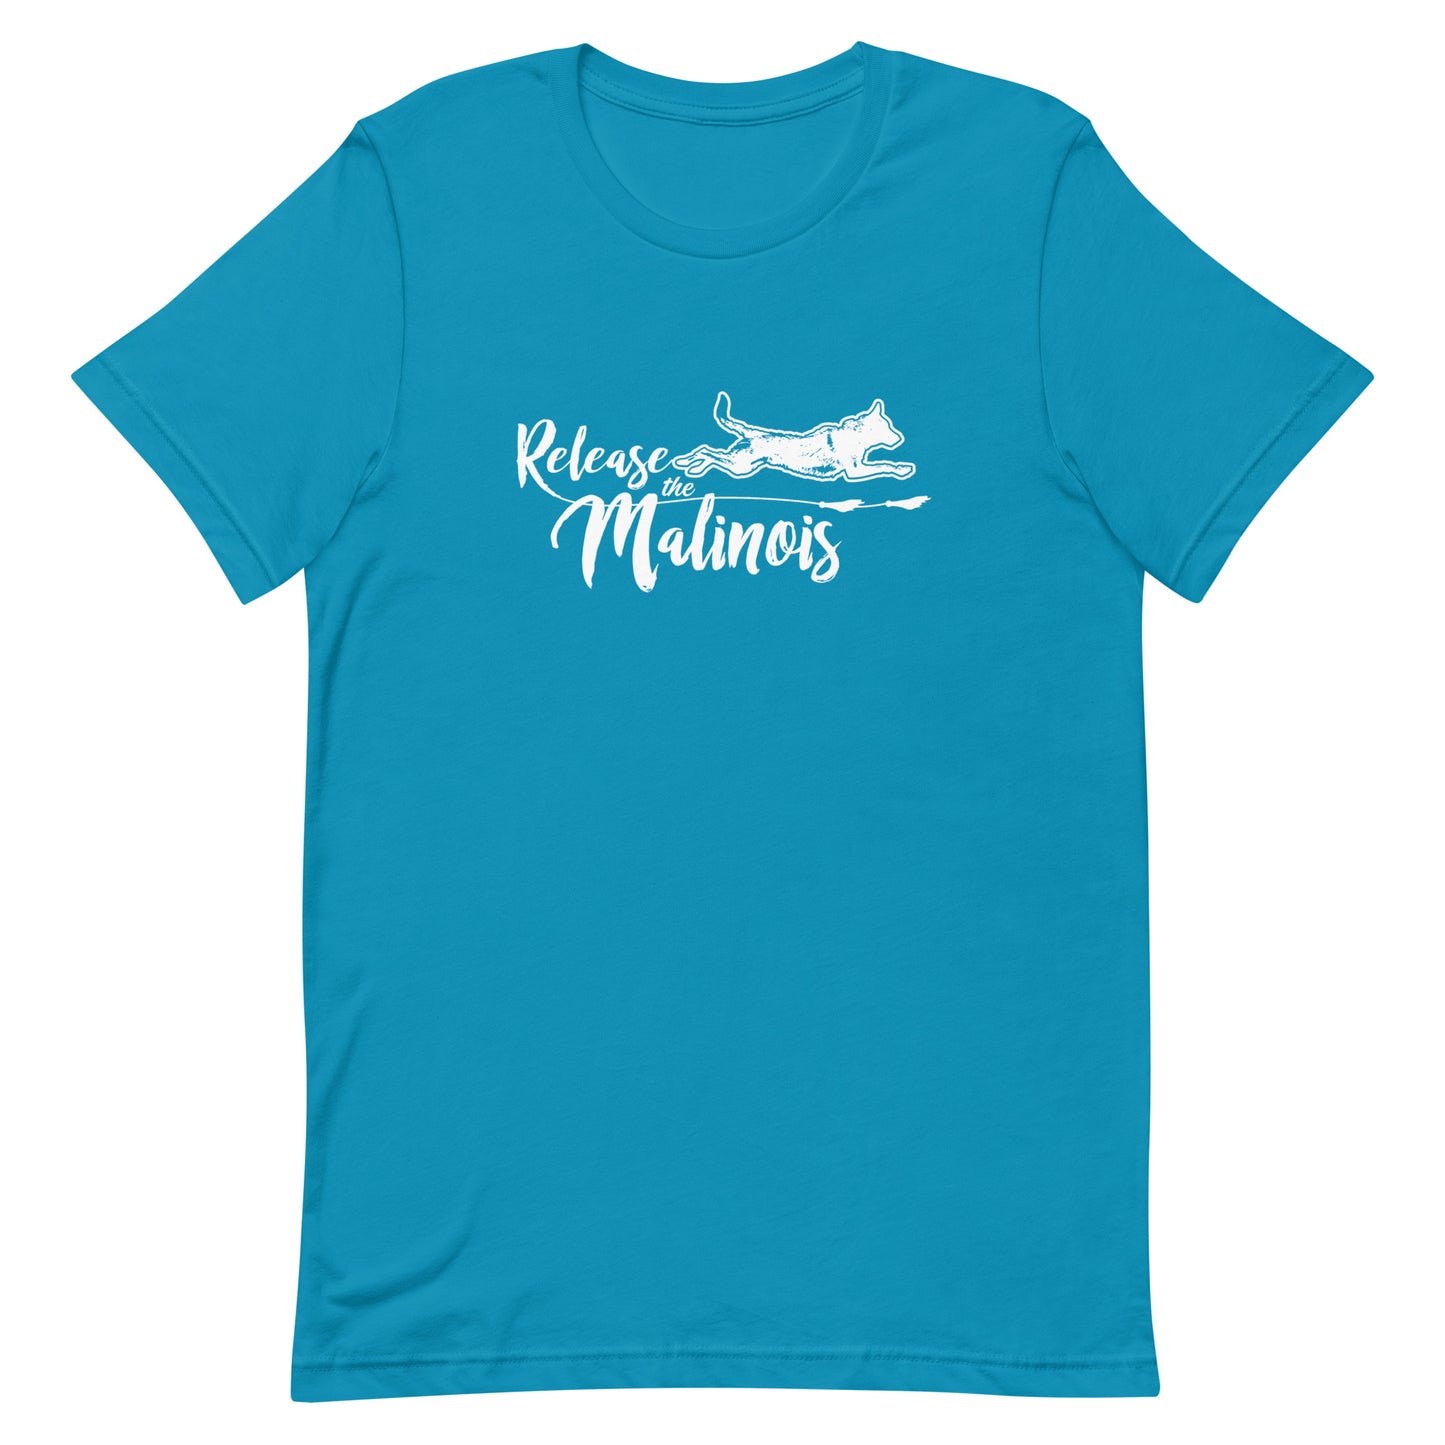 RELEASE THE MALINOIS - Unisex t-shirt